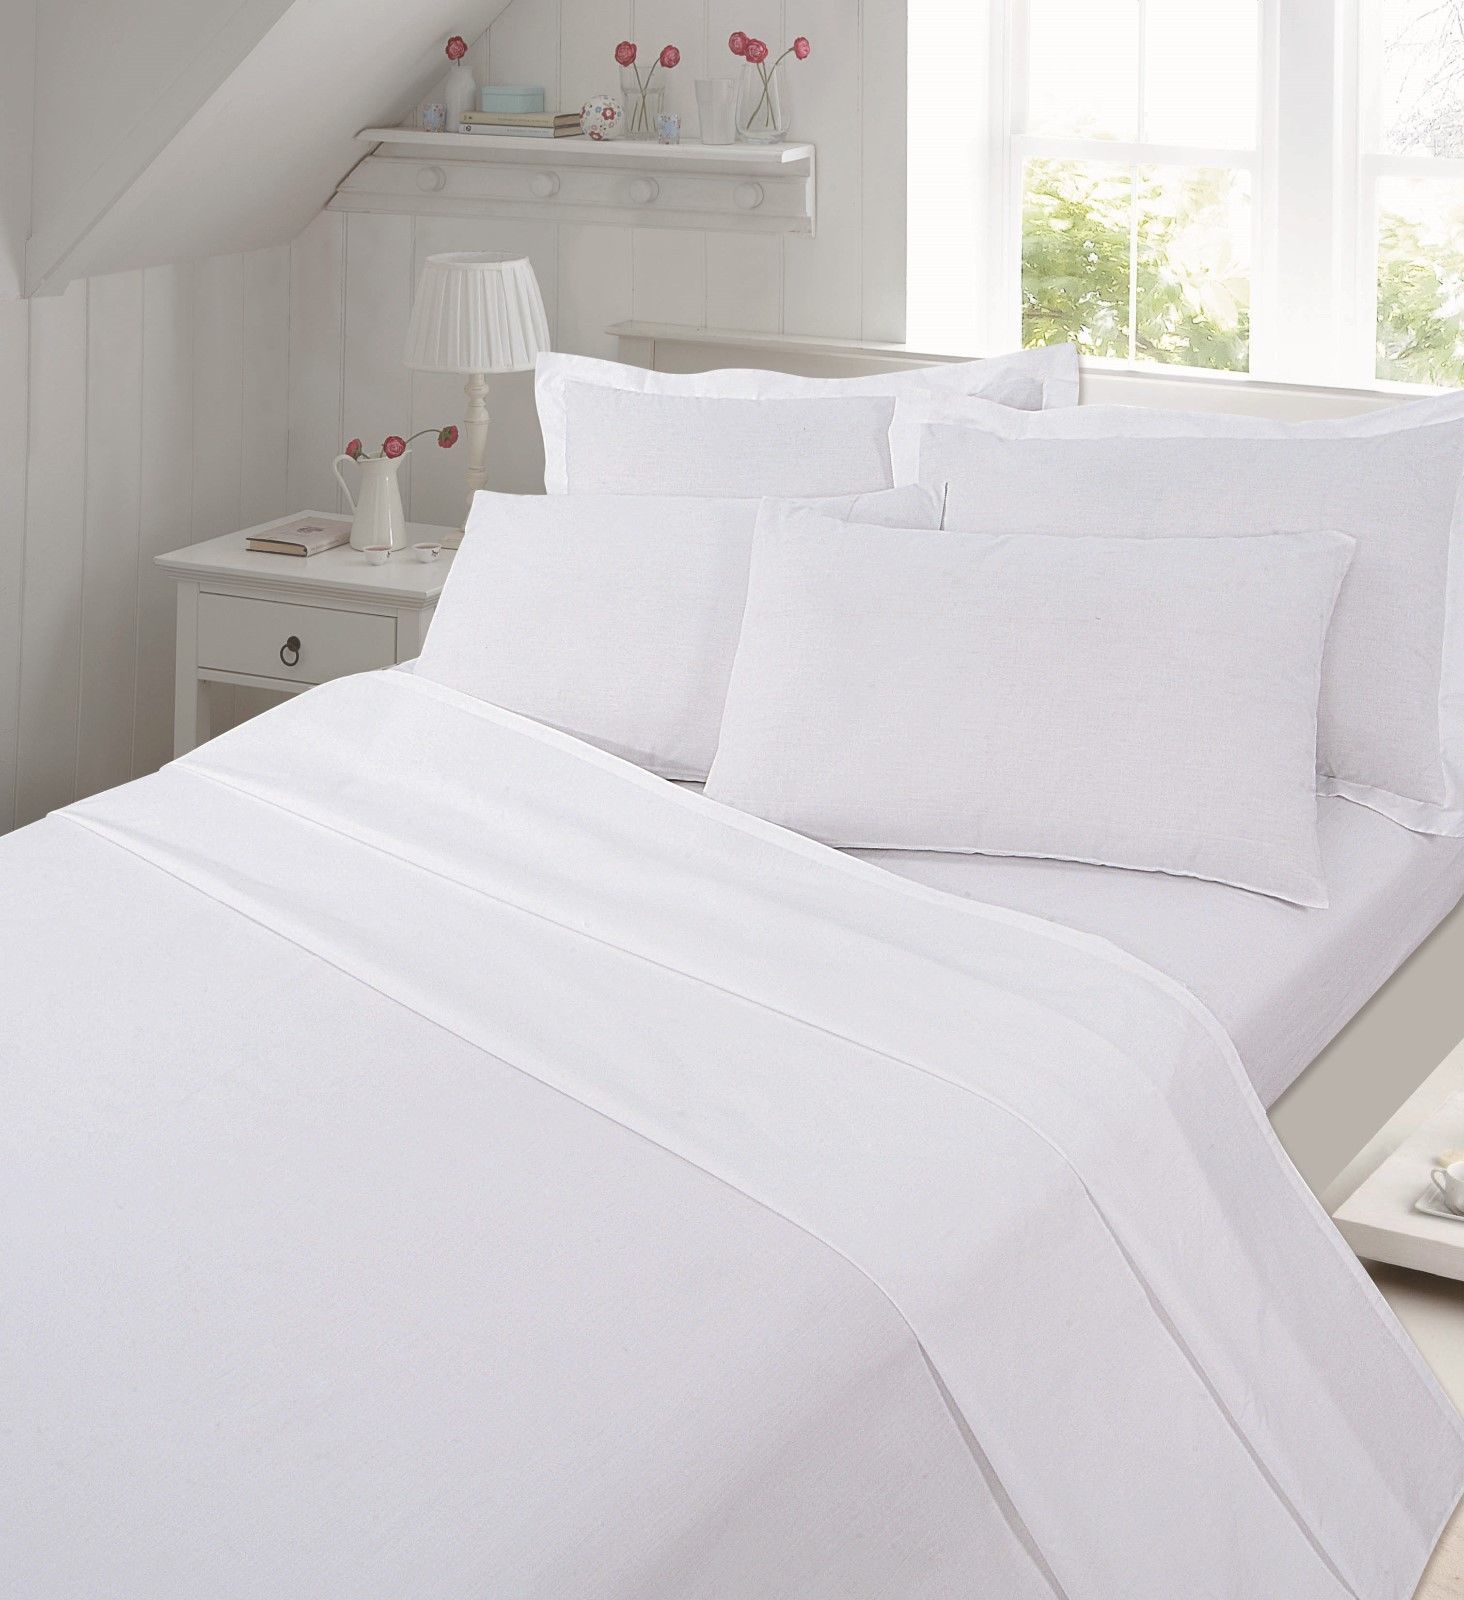 Flannelette Fitted Sheet Cotton Thermal With FREE MATCHING PILLOWCASE - TheComfortshop.co.ukBed Sheets0721718966470thecomfortshopTheComfortshop.co.ukFLNT FIT FREE PP White SingleWhiteFitted Sheet Single OnlyFlannelette Fitted Sheet Cotton Thermal With FREE MATCHING PILLOWCASE - TheComfortshop.co.uk